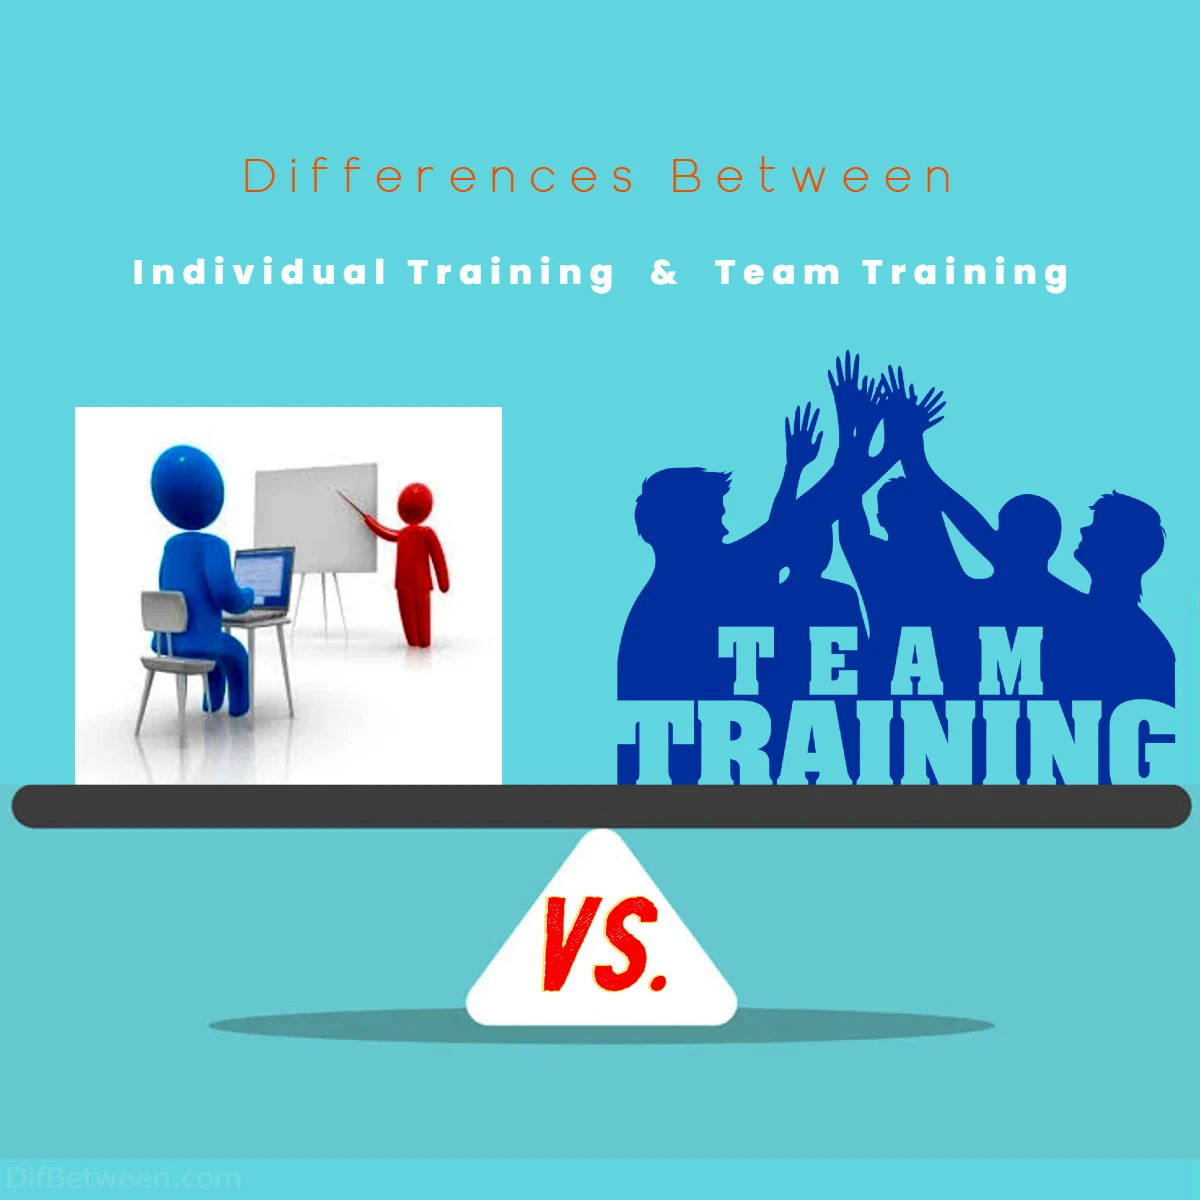 Differences Between Individual Training vs Team Training